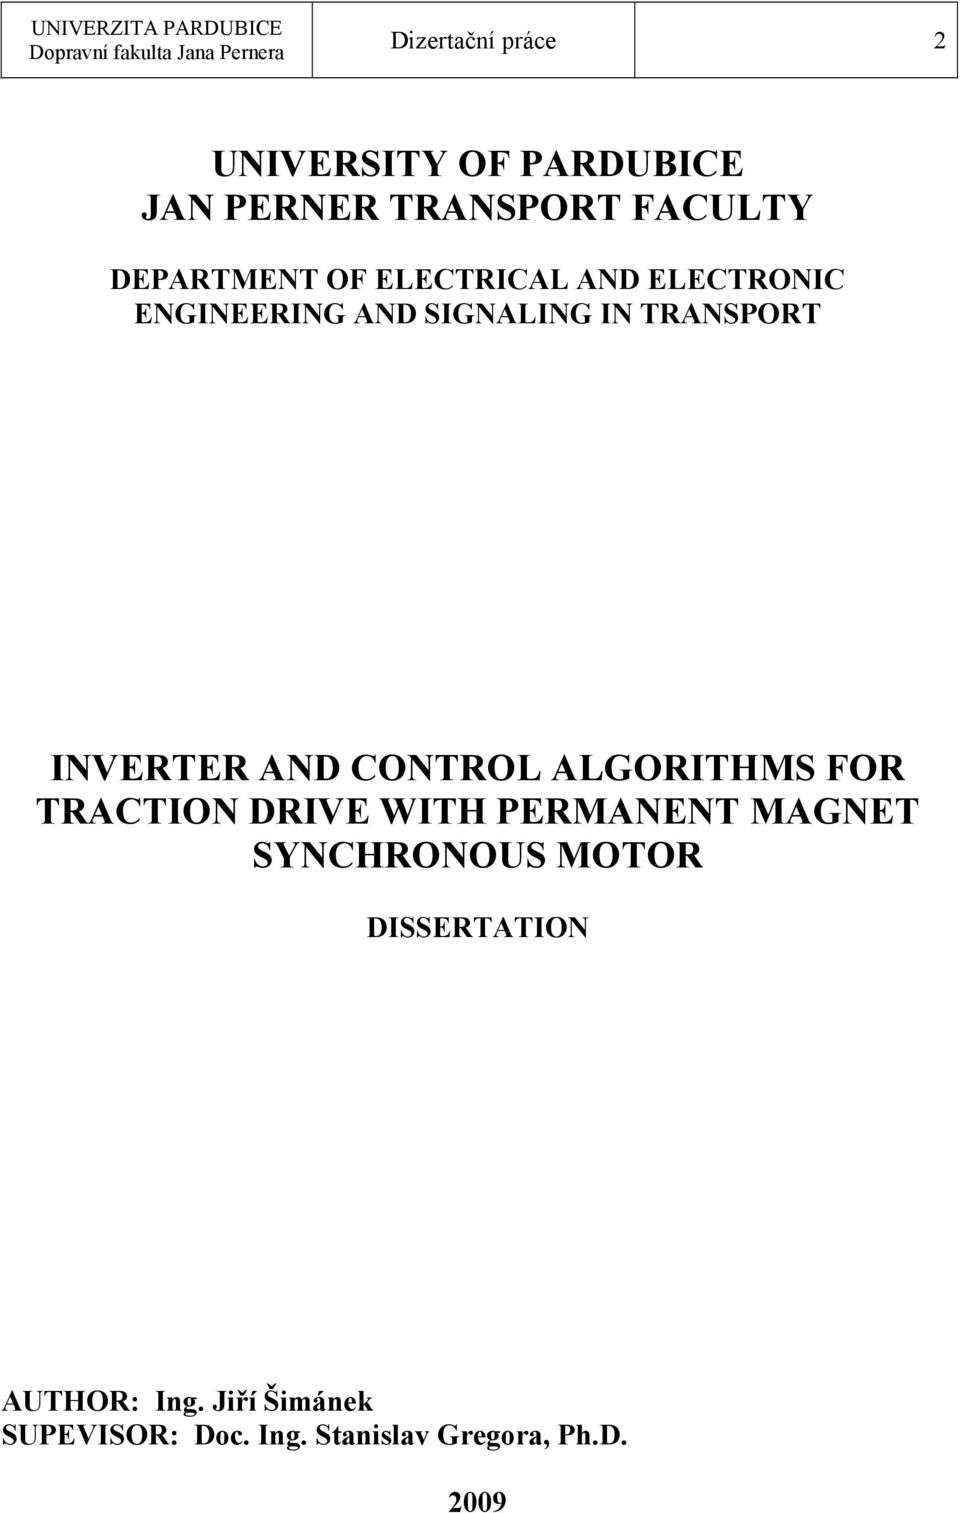 CO TROL ALGORITHMS FOR TRACTIO DRIVE WITH PERMA E T MAG ET SY CHRO OUS MOTOR